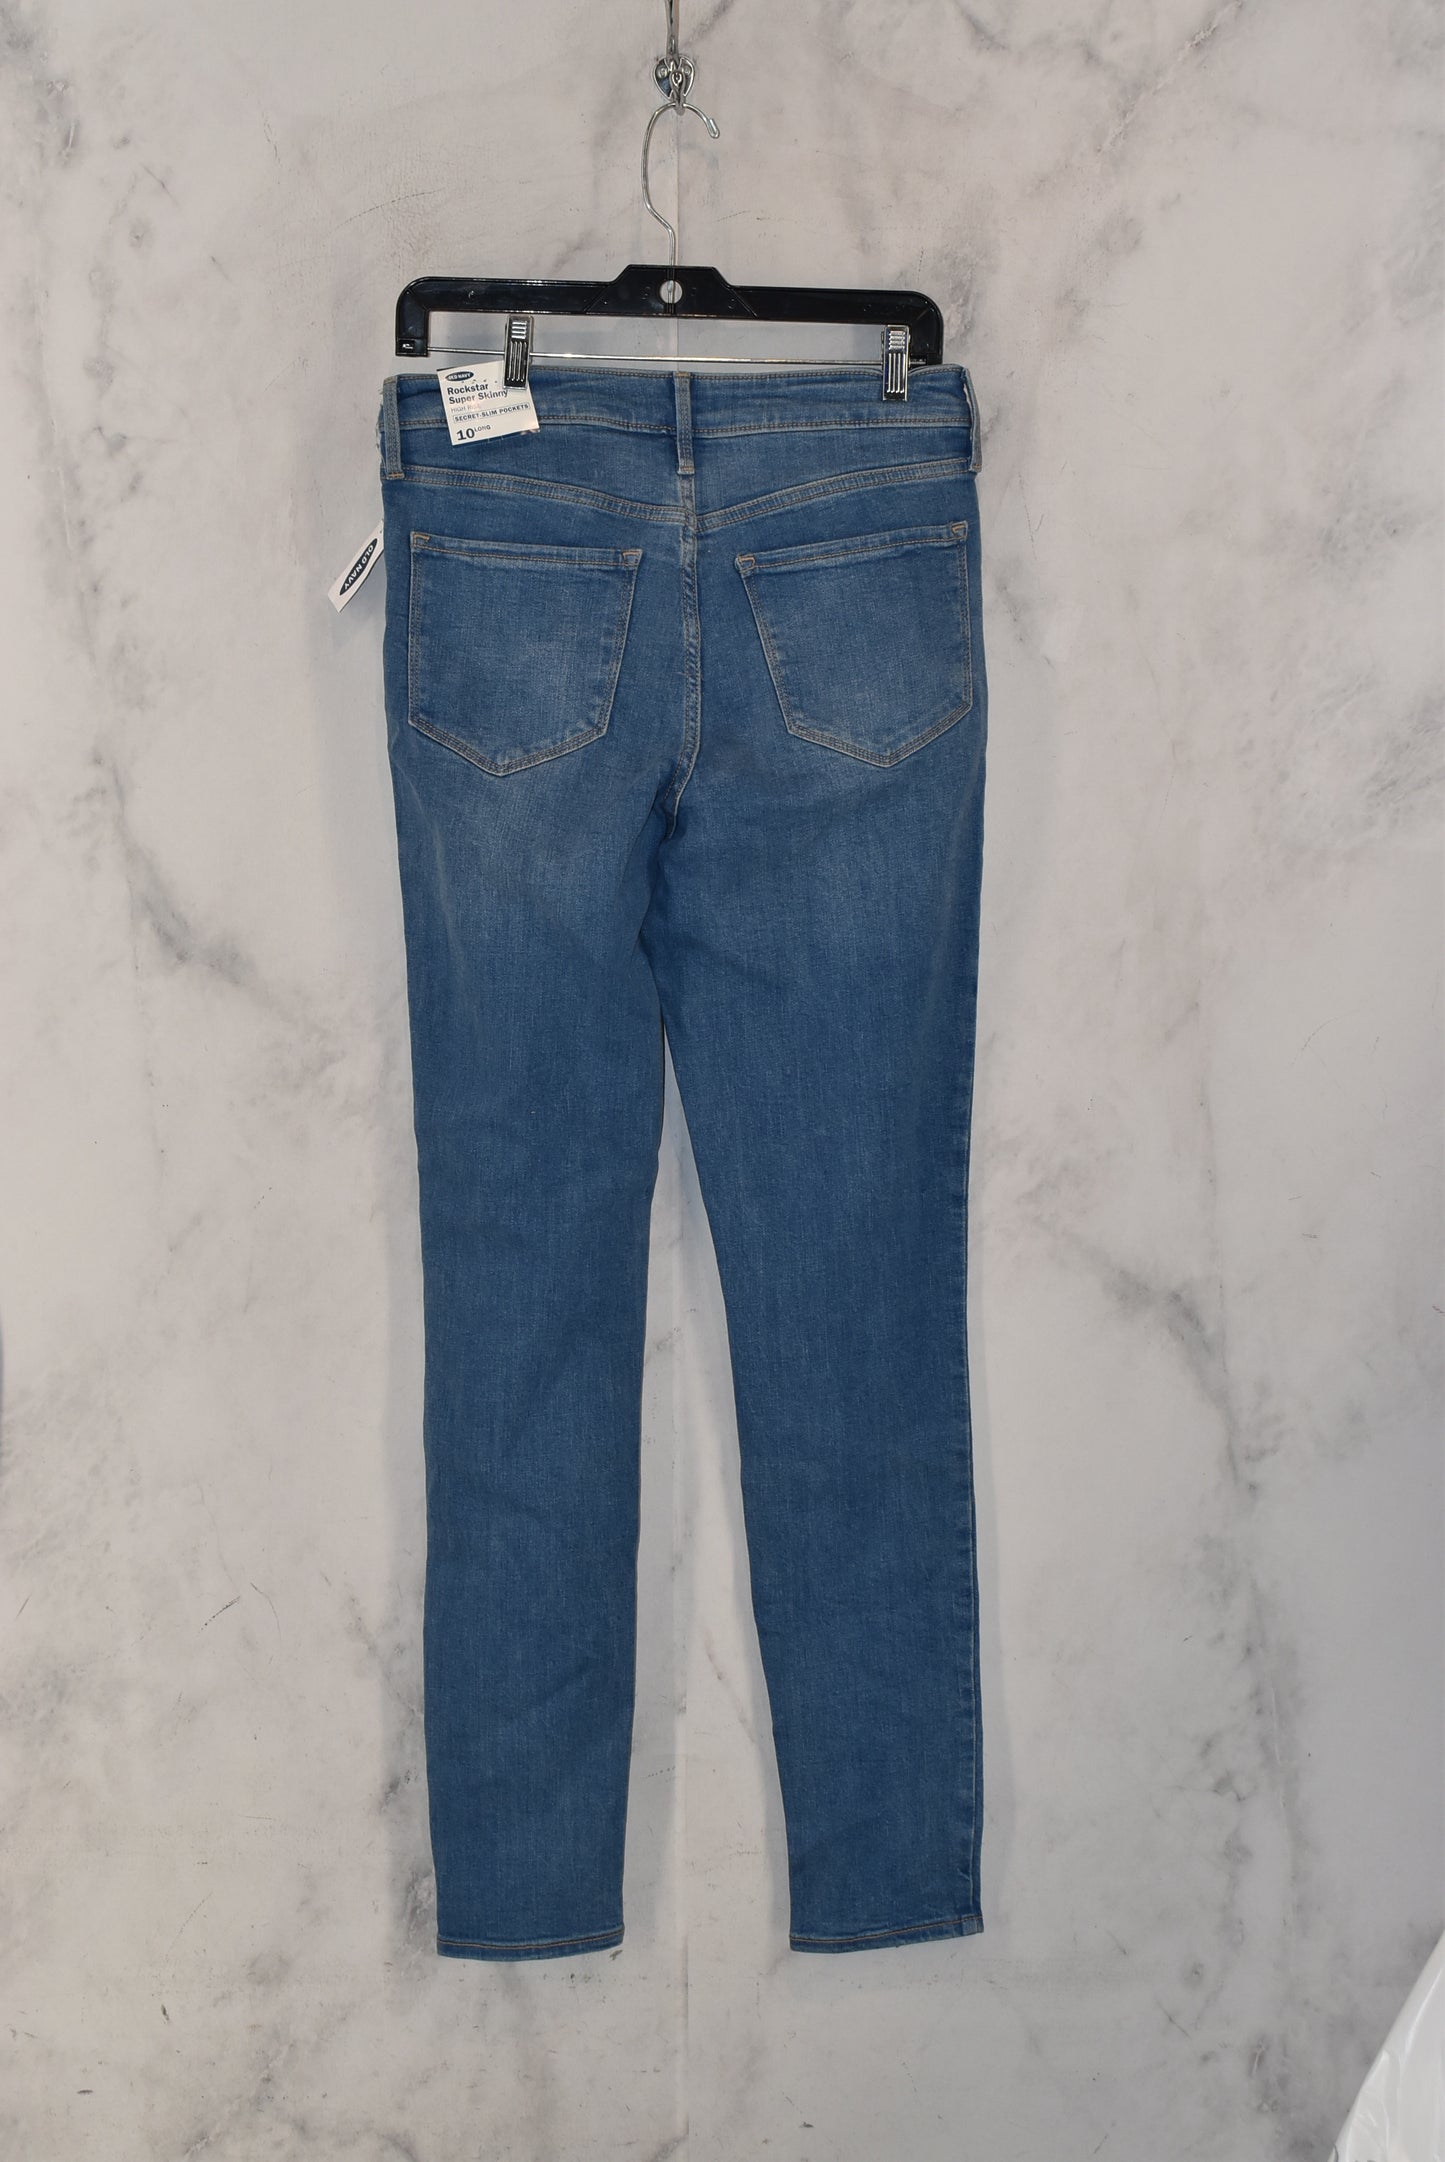 Jeans Skinny By Old Navy  Size: 10tall